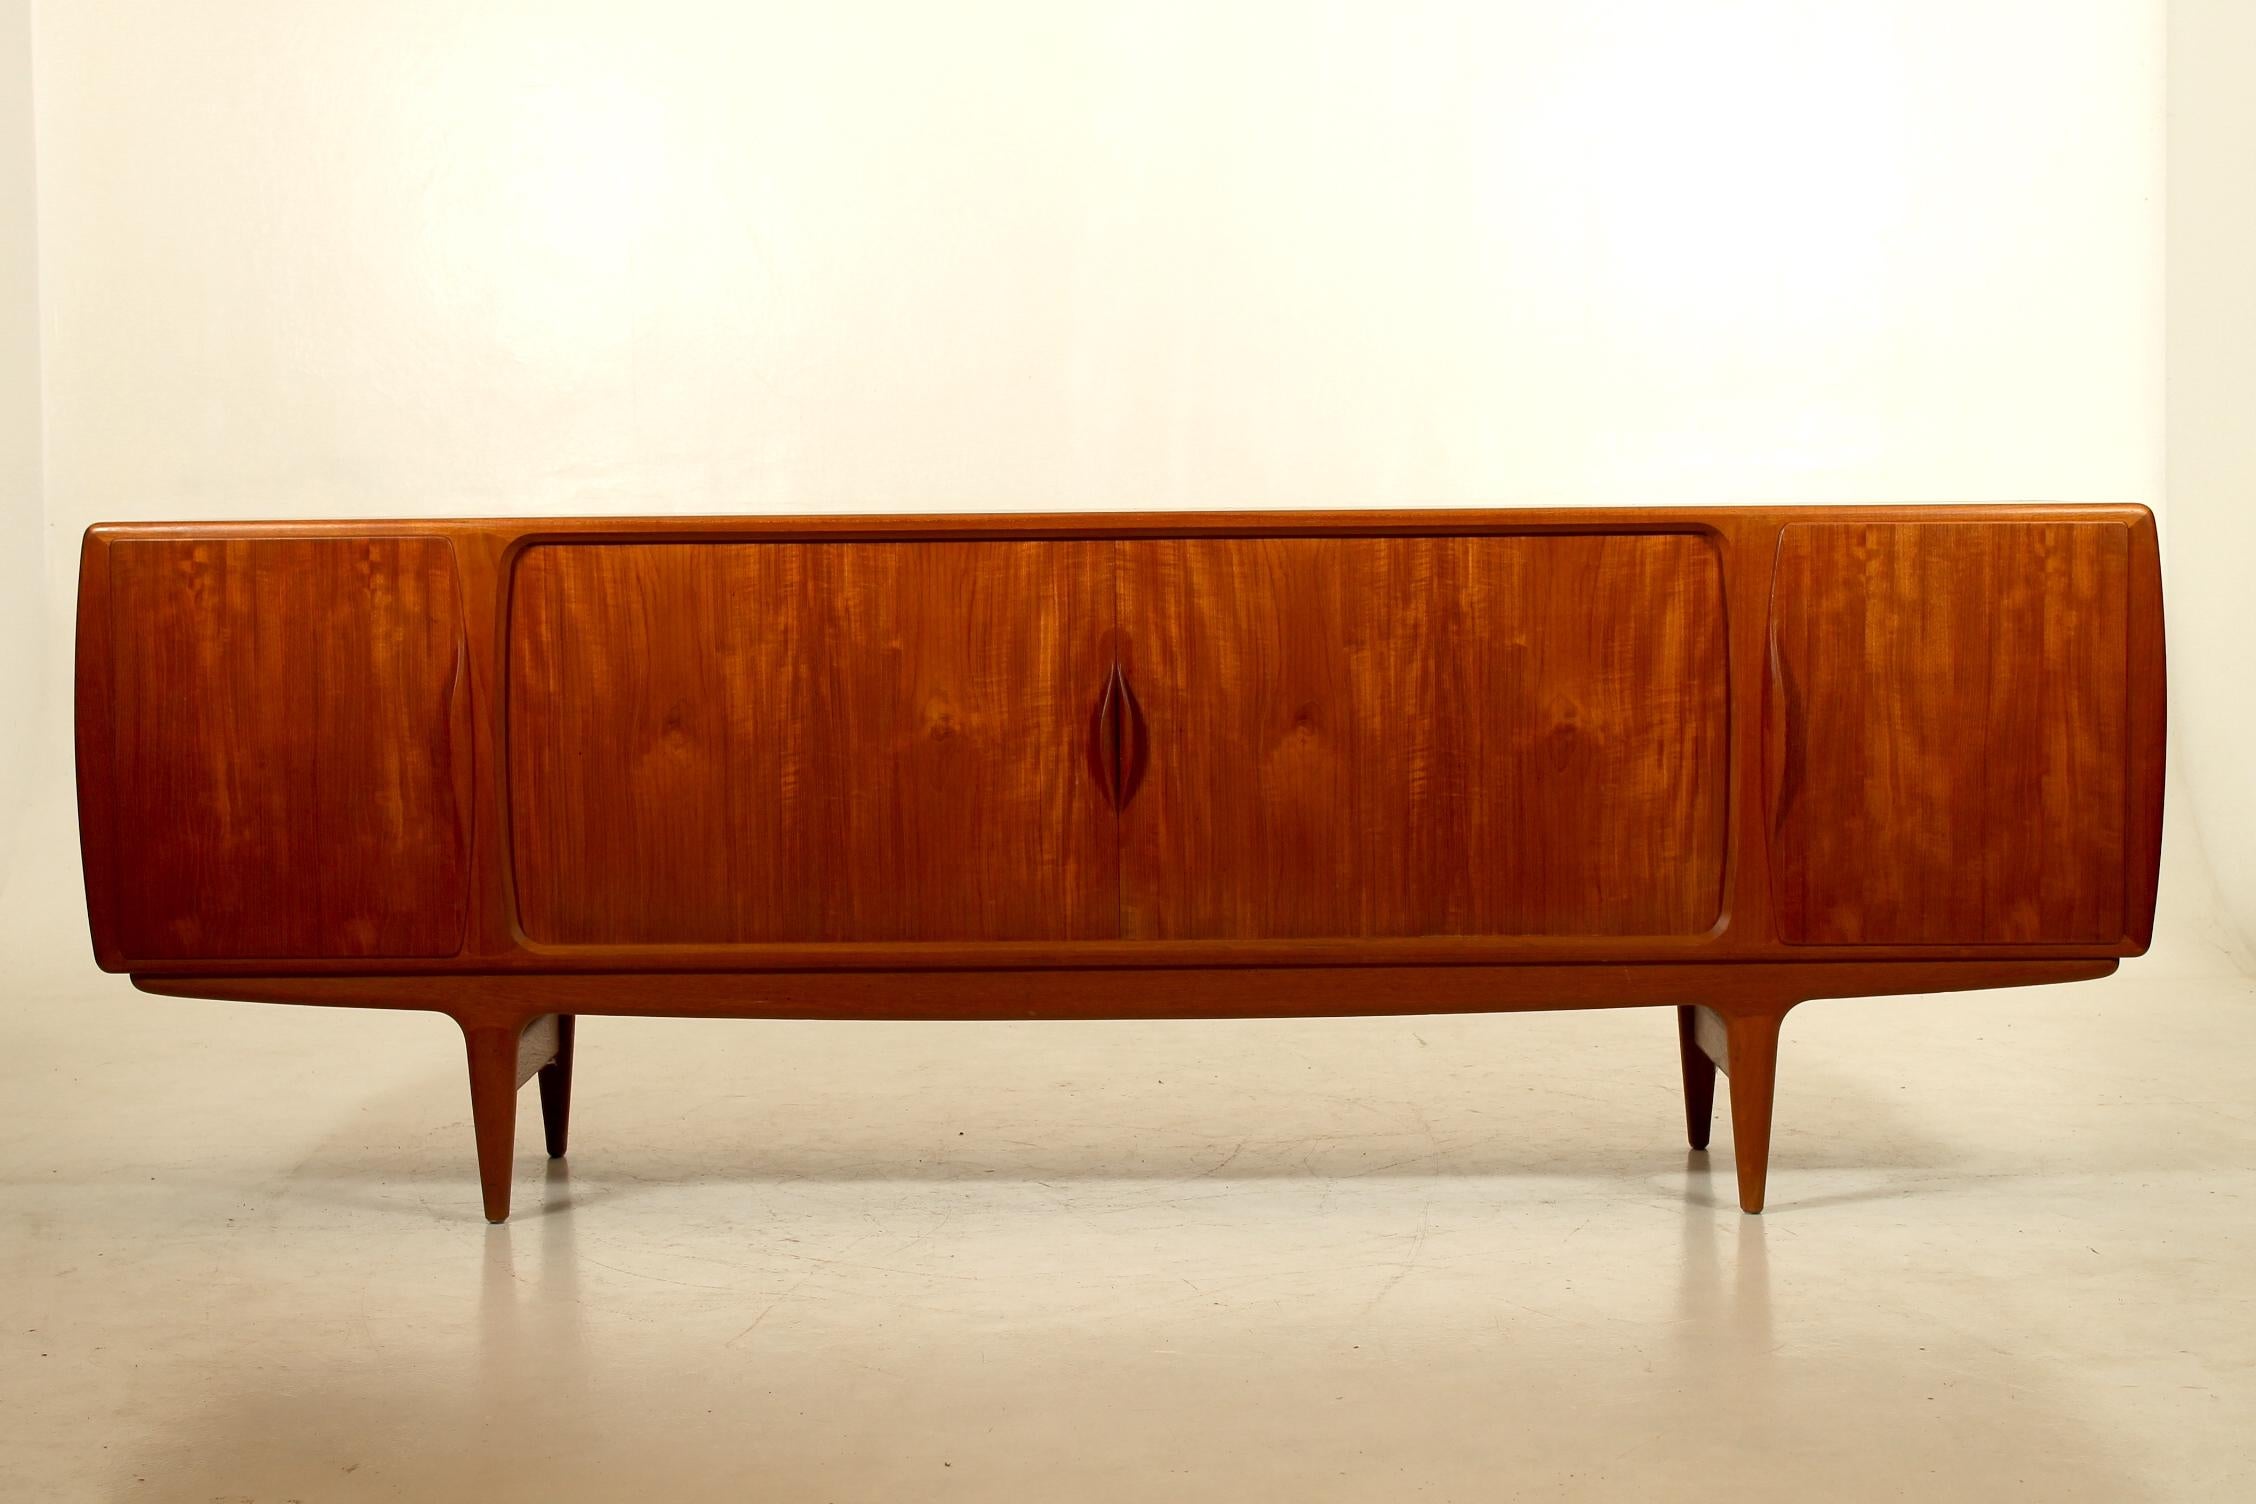 Long low teak sideboard with tambour doors and cabinets and drawers. Veenered back. Produced in the early 1960s by Uldum Møbelfabrik, Denmark. 
Model U15 designed by Johannes Andersen. Sold by H.C.Møbler, Copenhagen, Denmark.